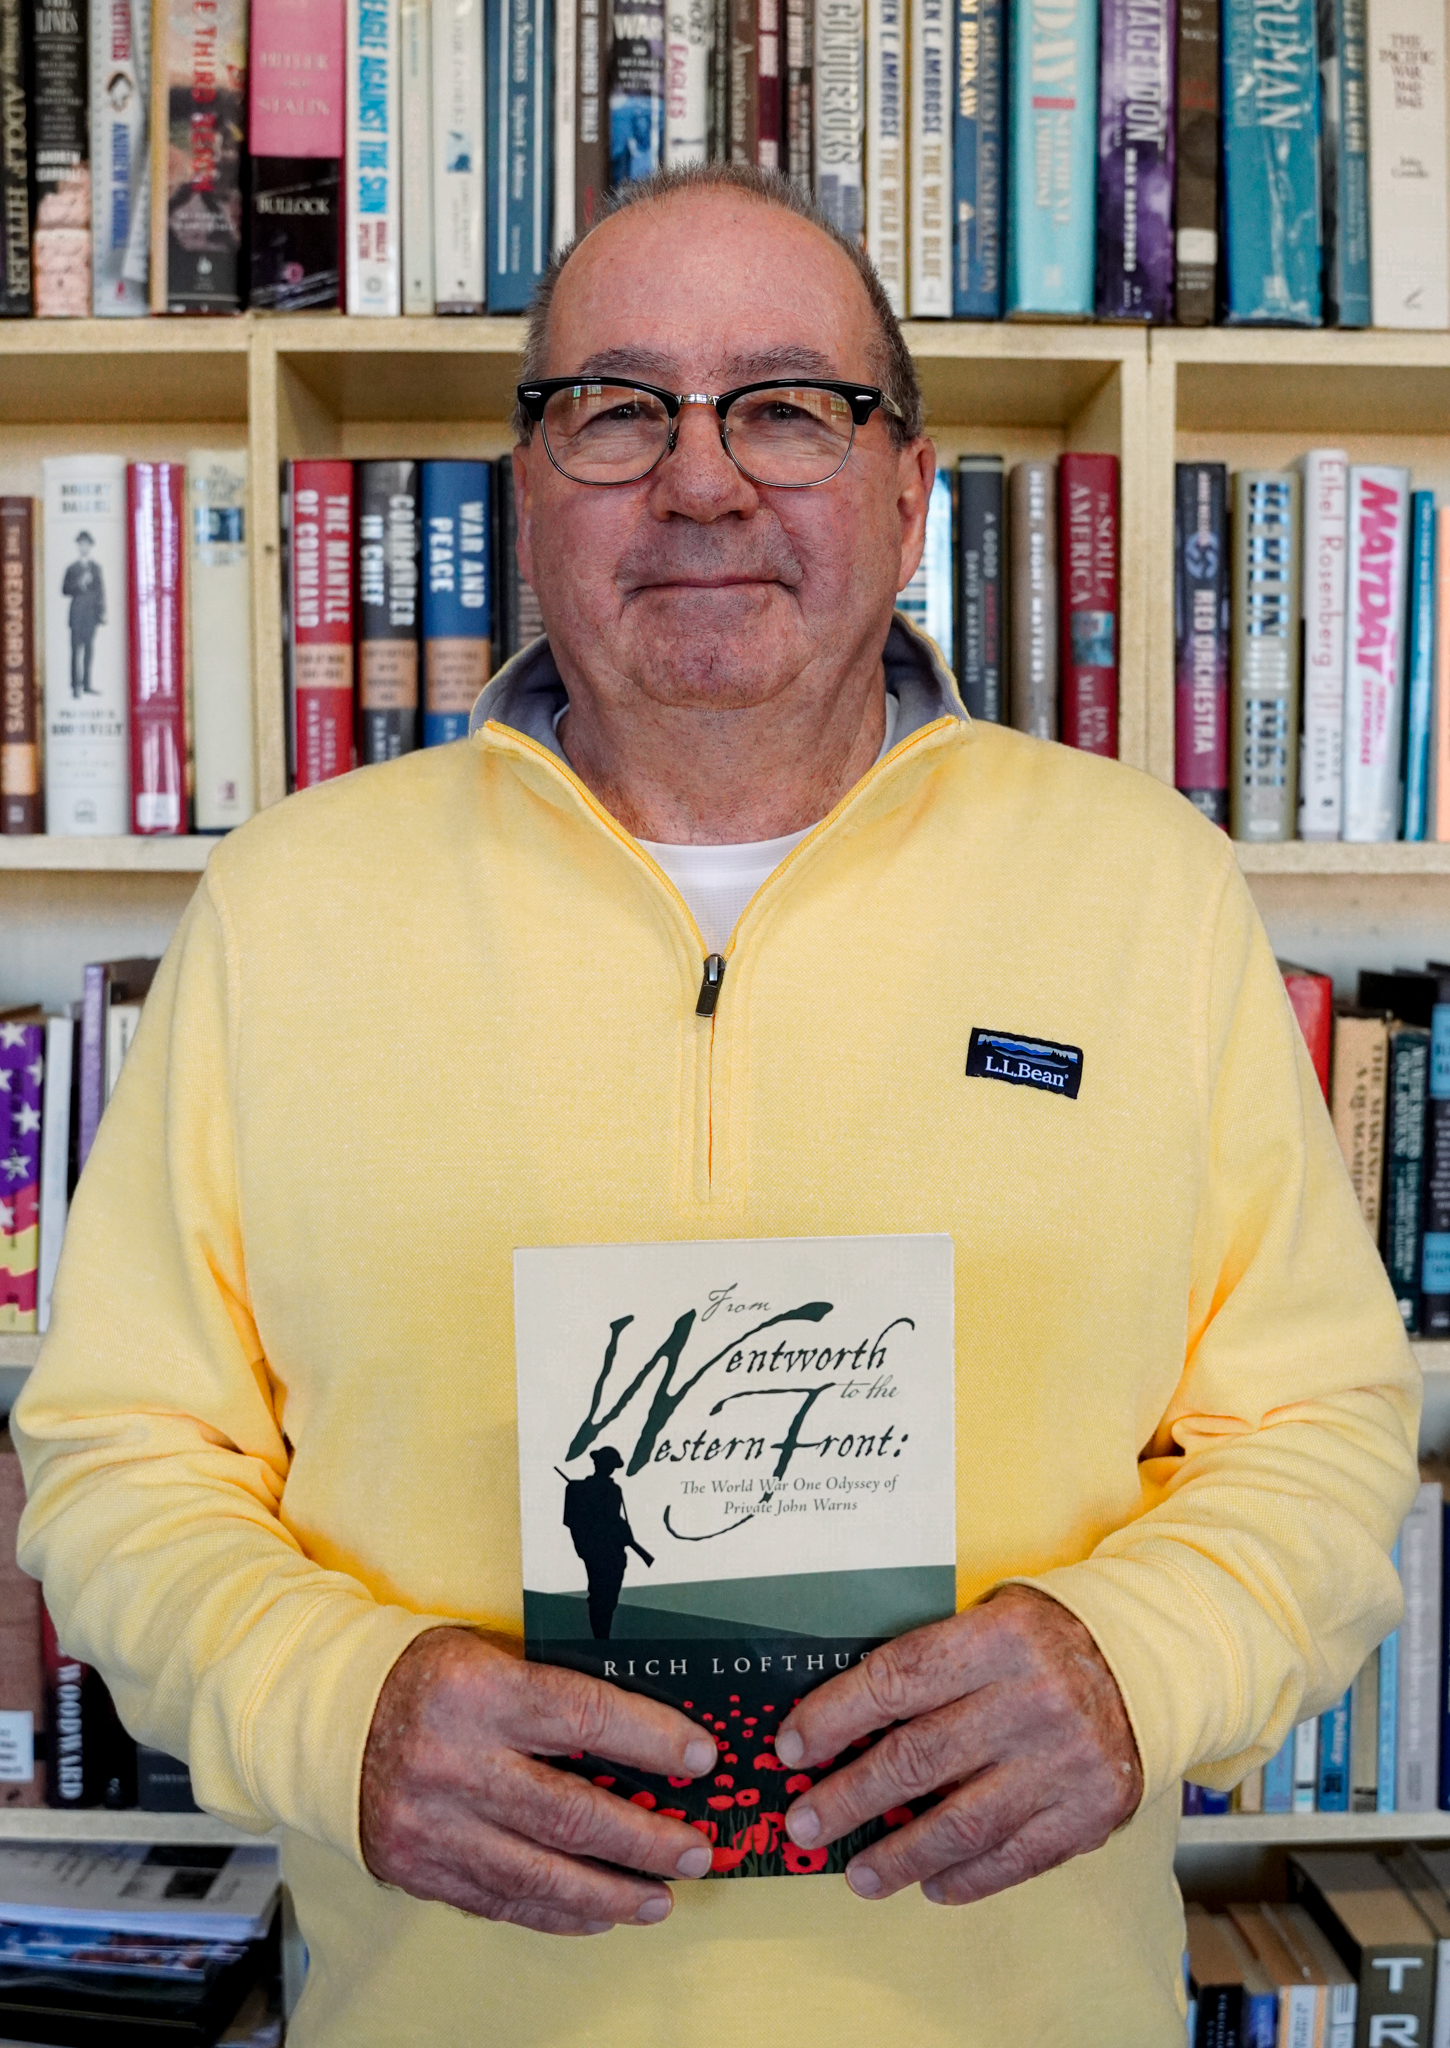 Dr. Rich Lofthus holding his book, From Wentworth to the Western Front